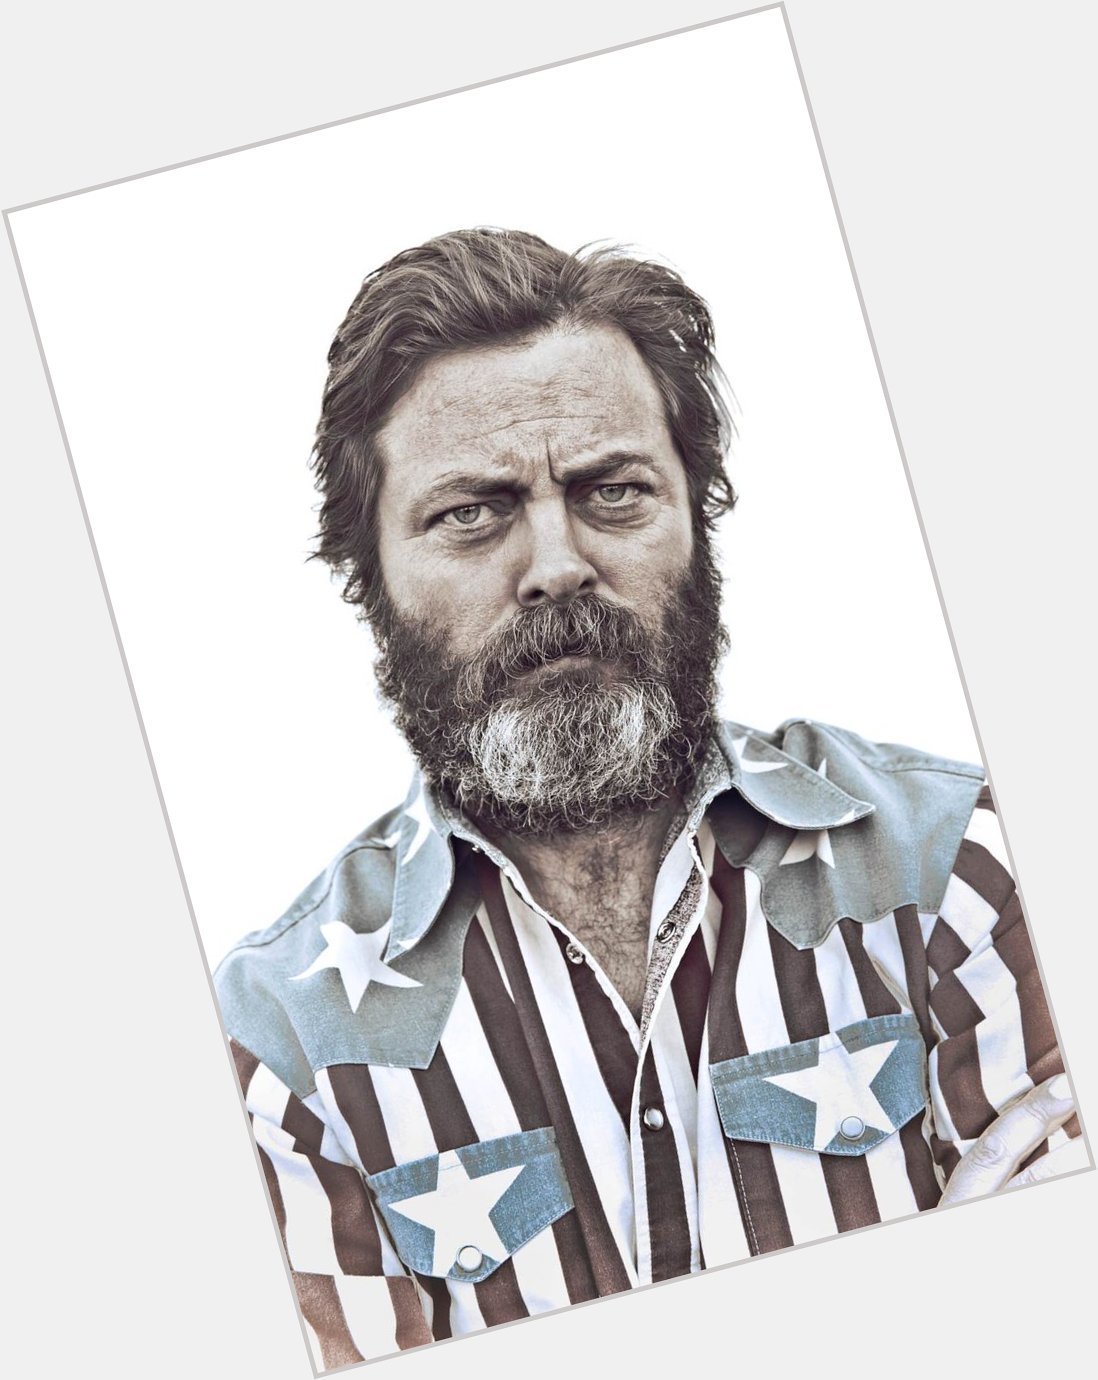 Happy 50th birthday, Nick Offerman!

What\s your favorite role he\s done?   